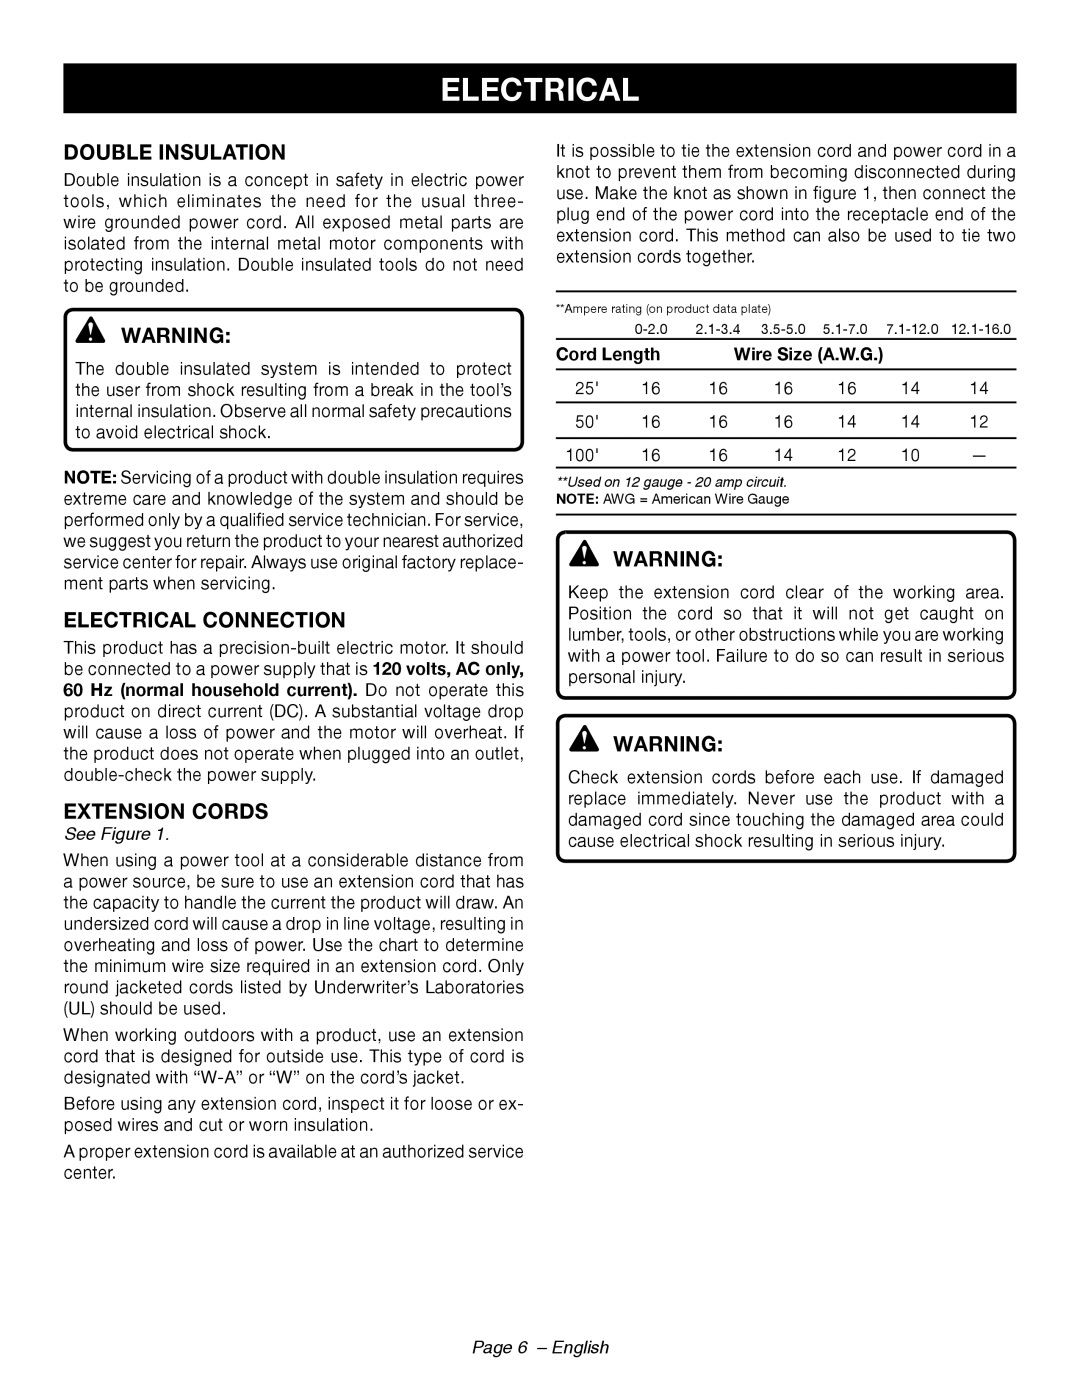 Ryobi RY44140 Double Insulation, Electrical Connection, Extension Cords, See Figure, Page 6 - English 